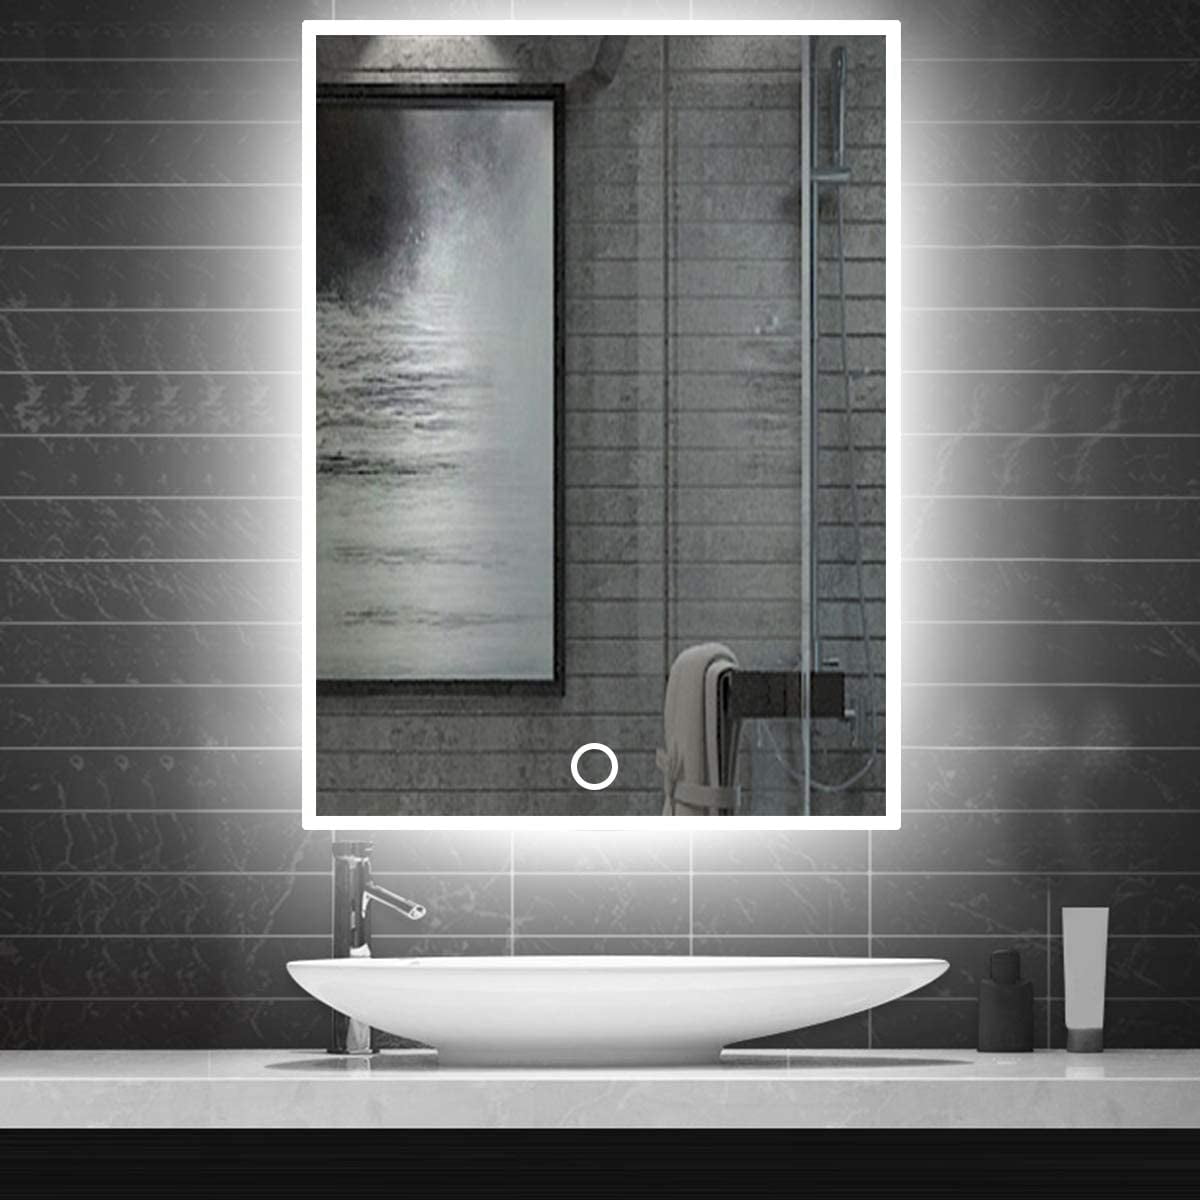 EMKE LED Illuminated Bathroom Mirrors with Lights Touch Switch Bathroom Mirror 500 x 600 Wall Mirror Cool White 6500K A+ 